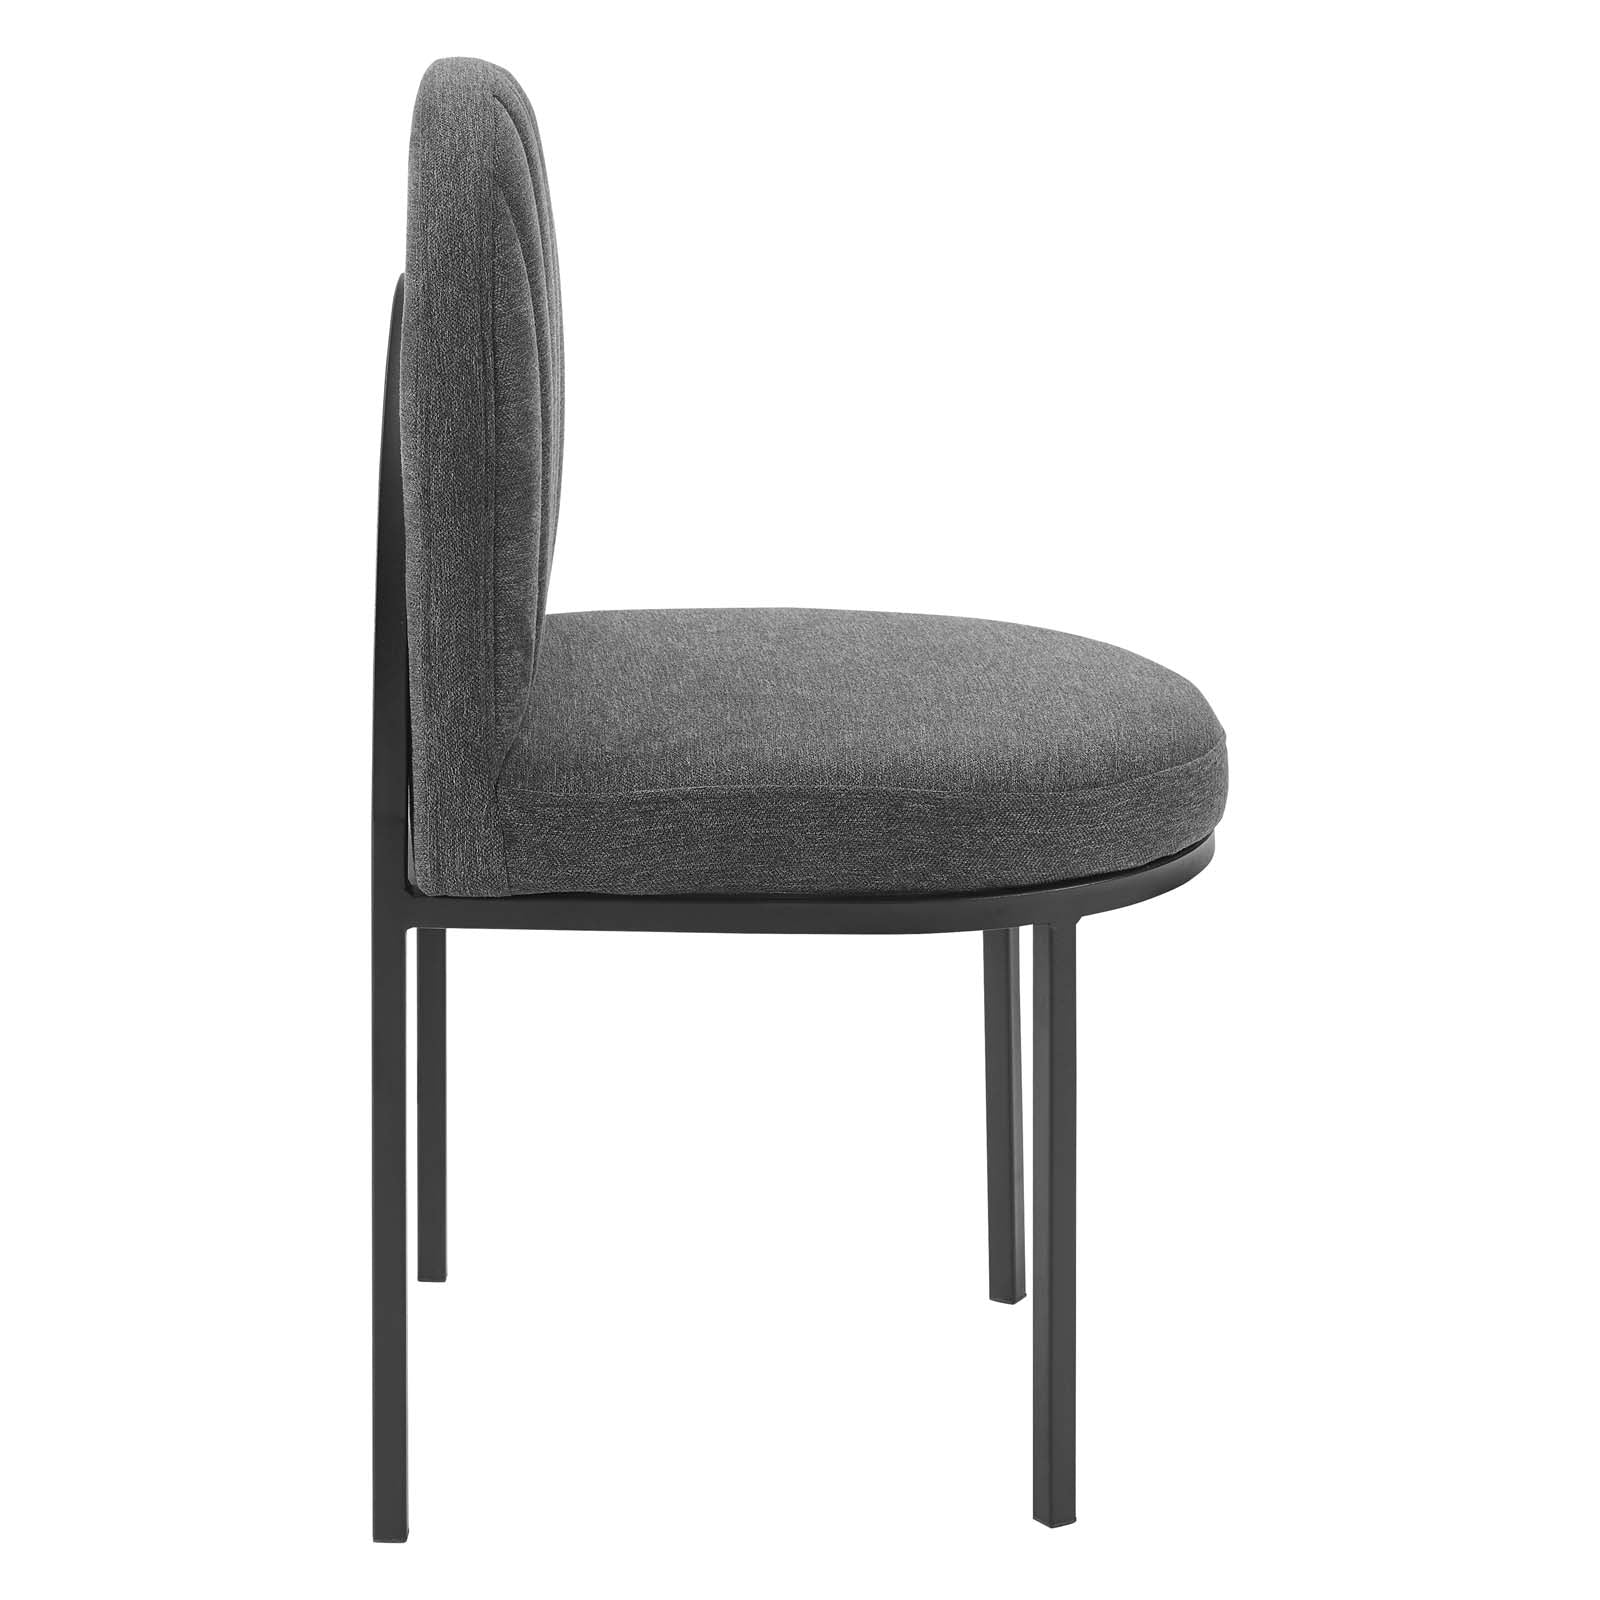 Isla Channel Tufted Upholstered Fabric Dining Side Chair